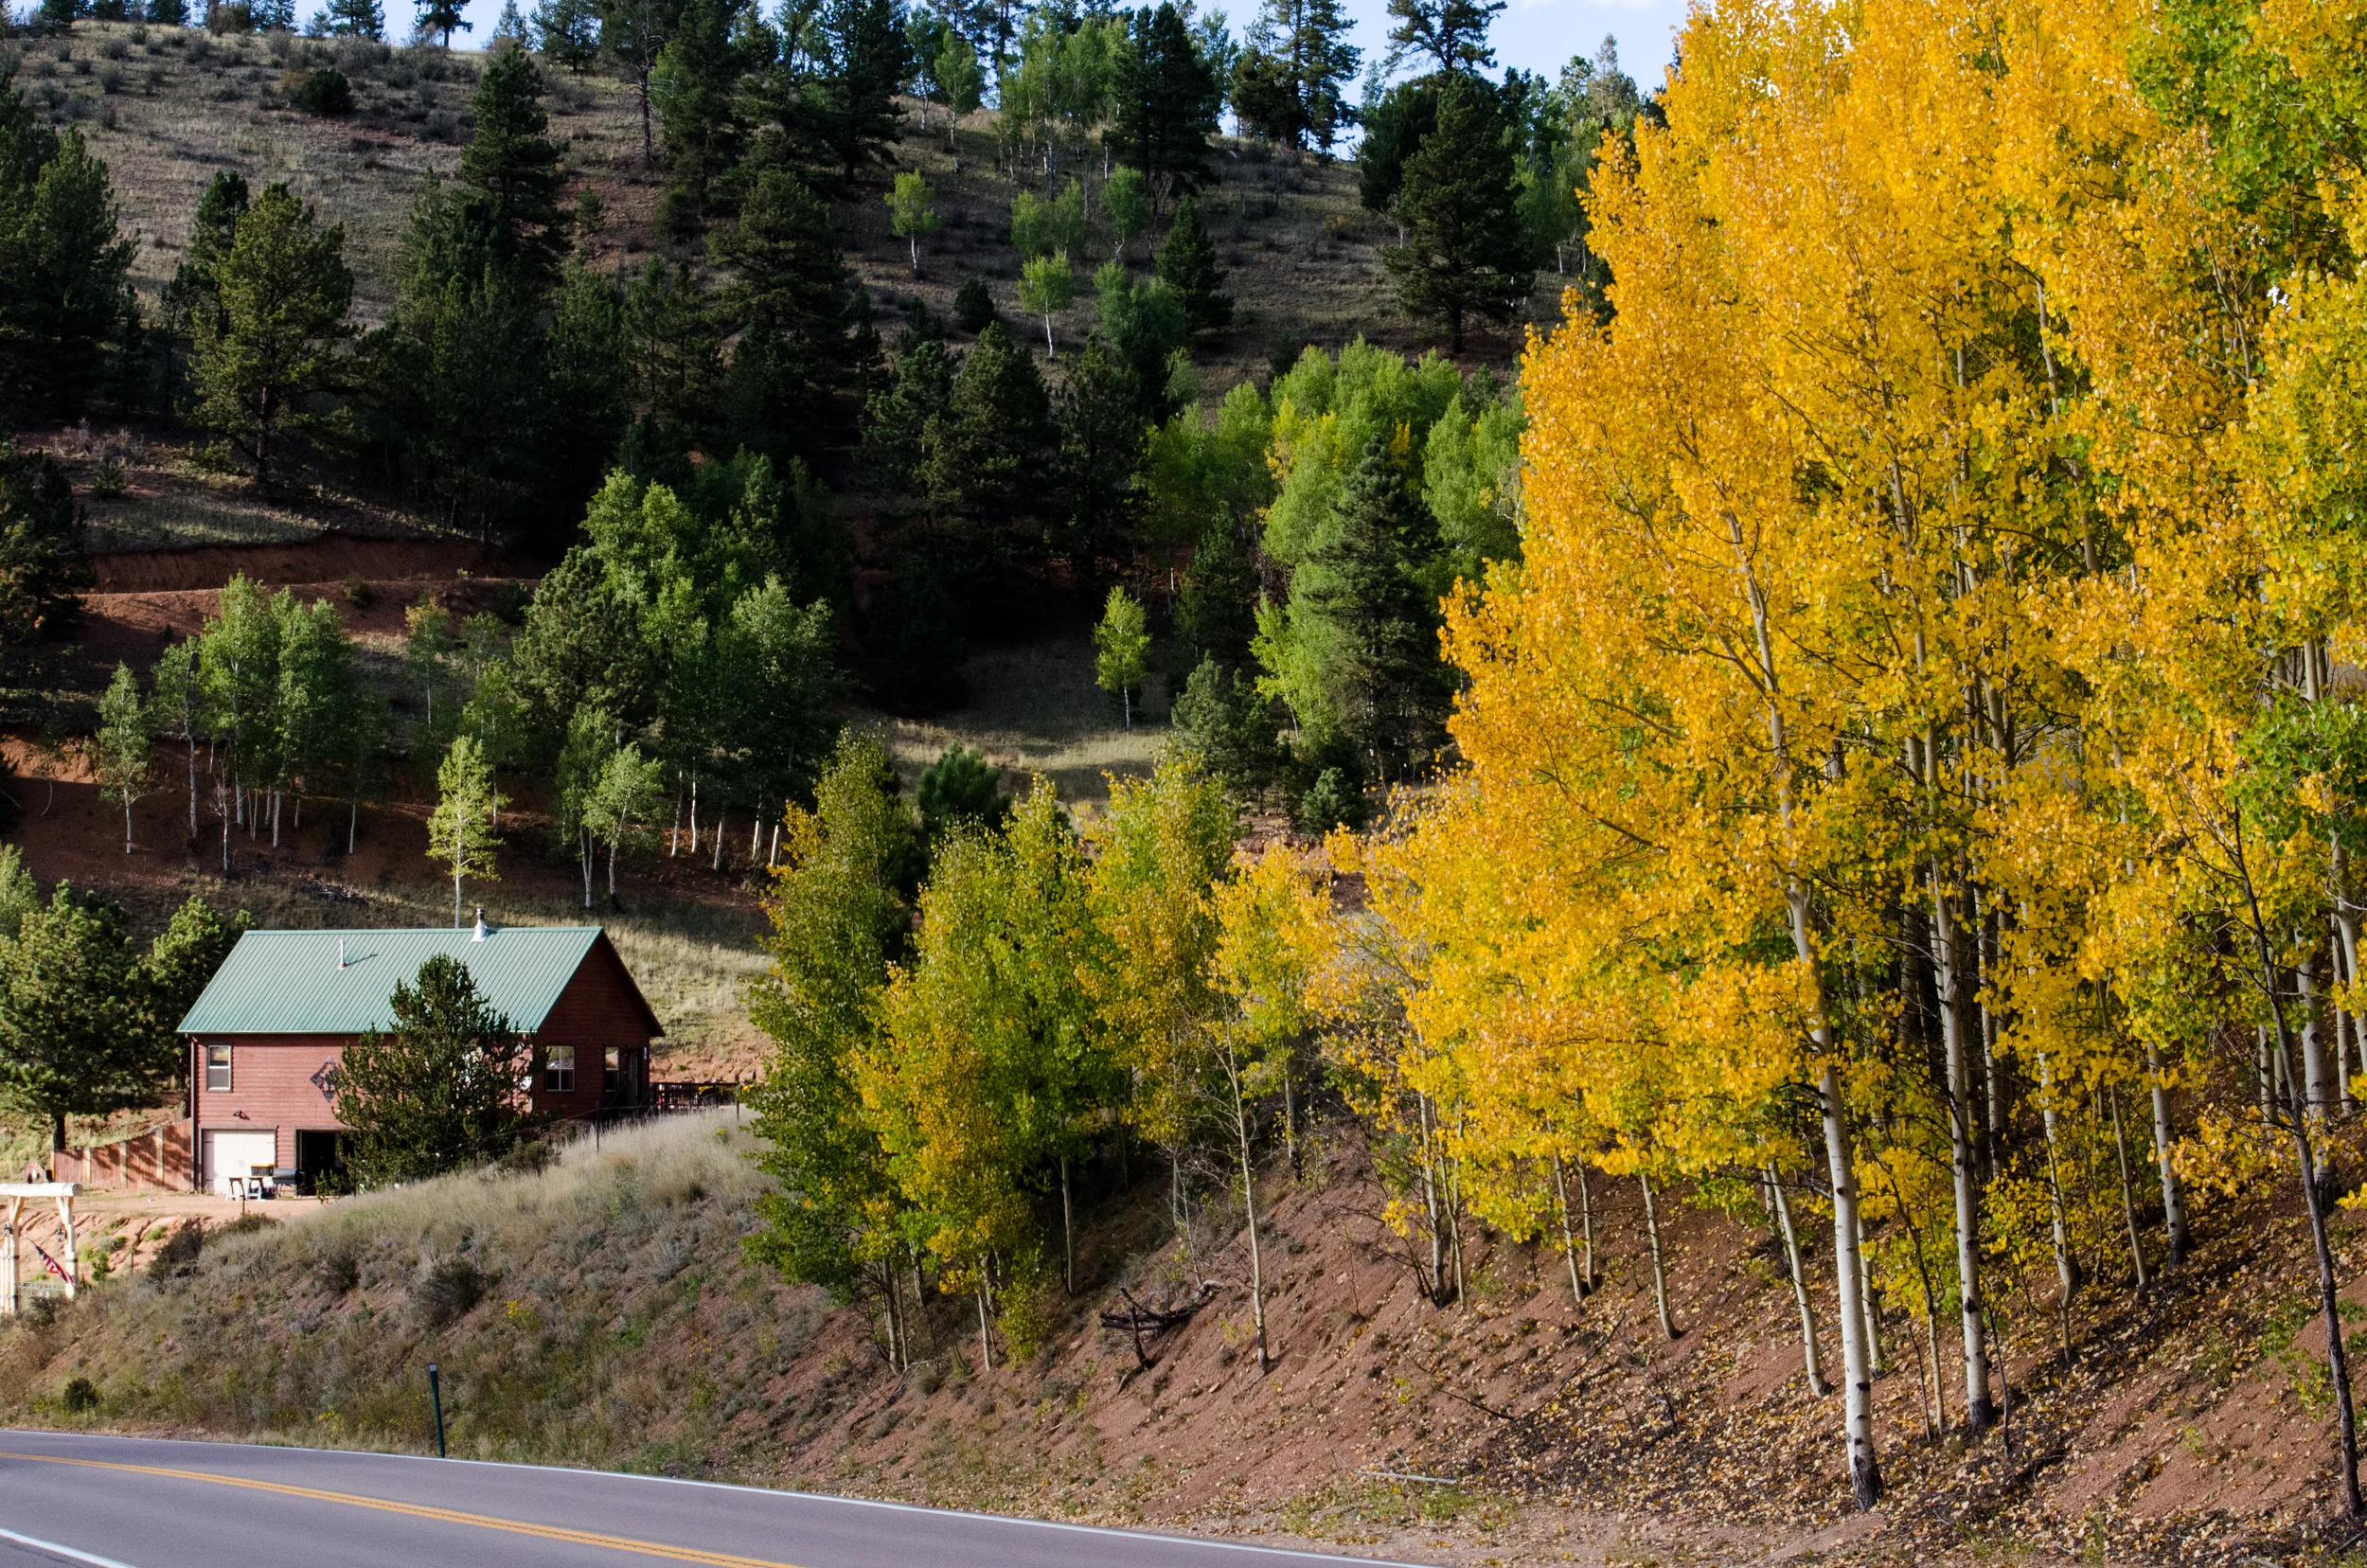 Mountain cabin amidst fall-colored trees